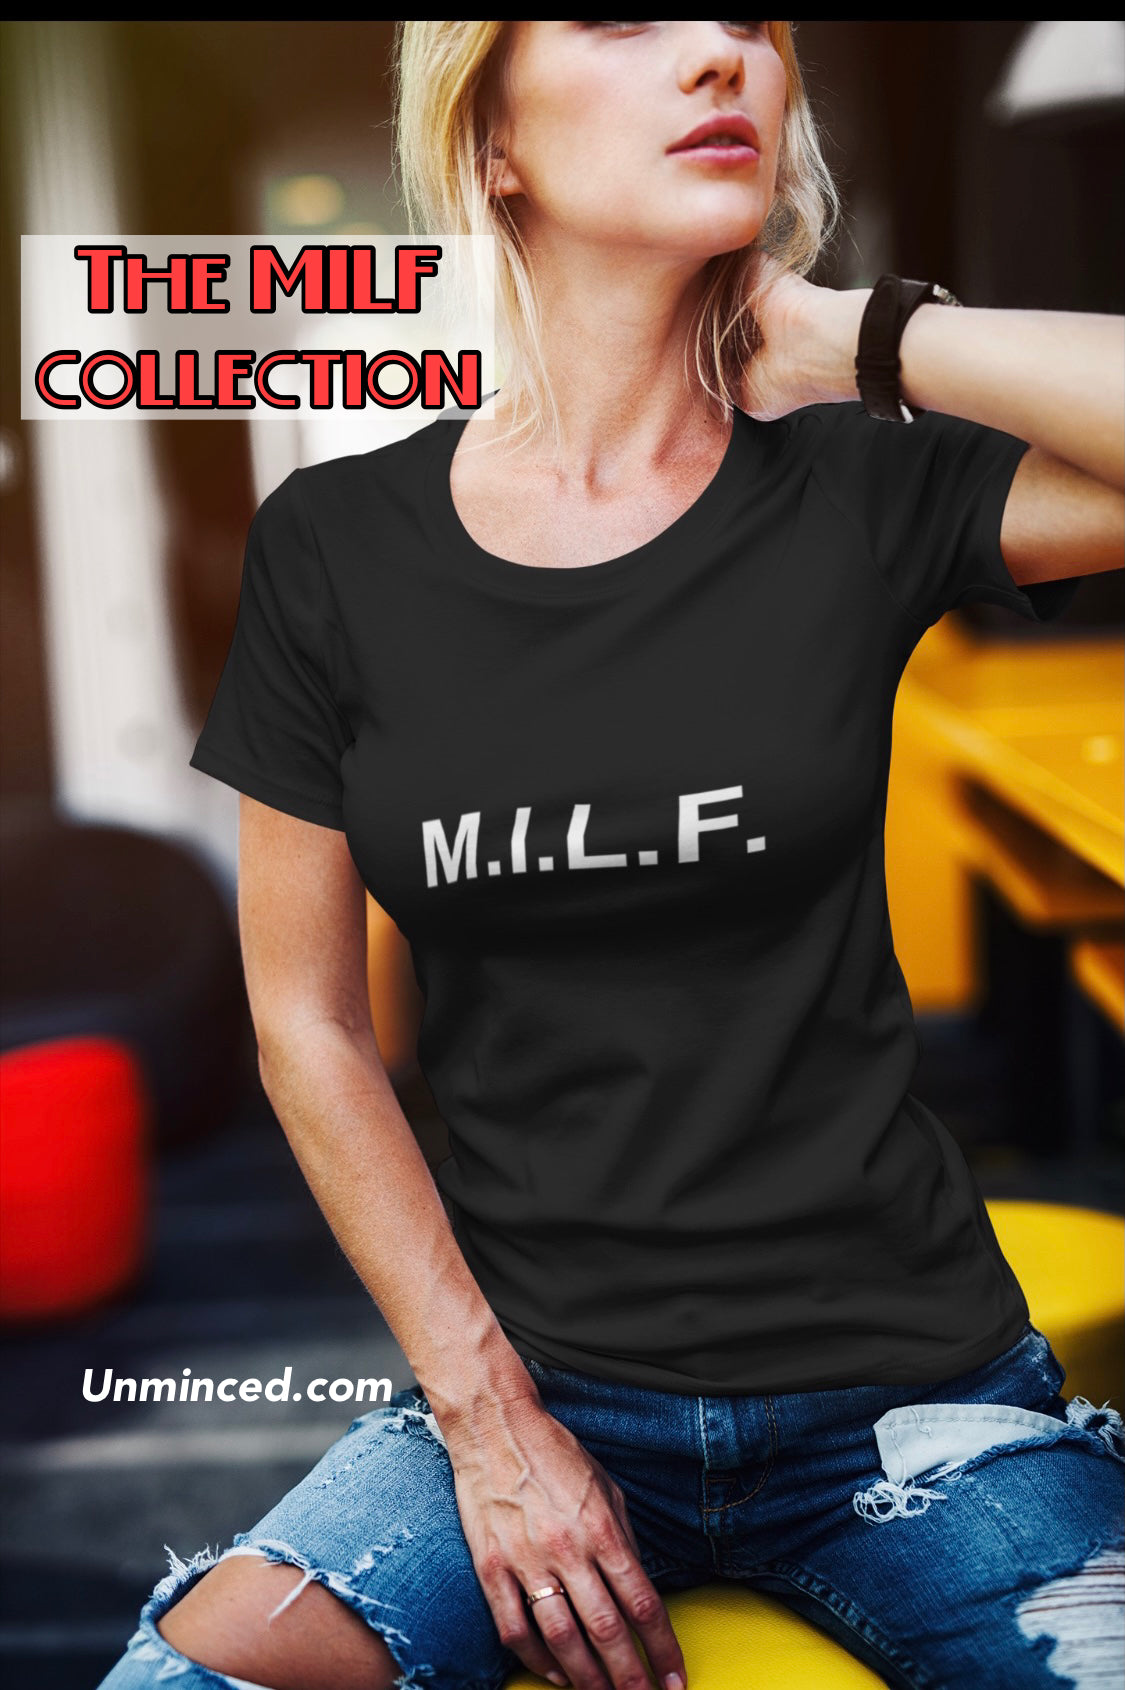 Milf is more than a feeling